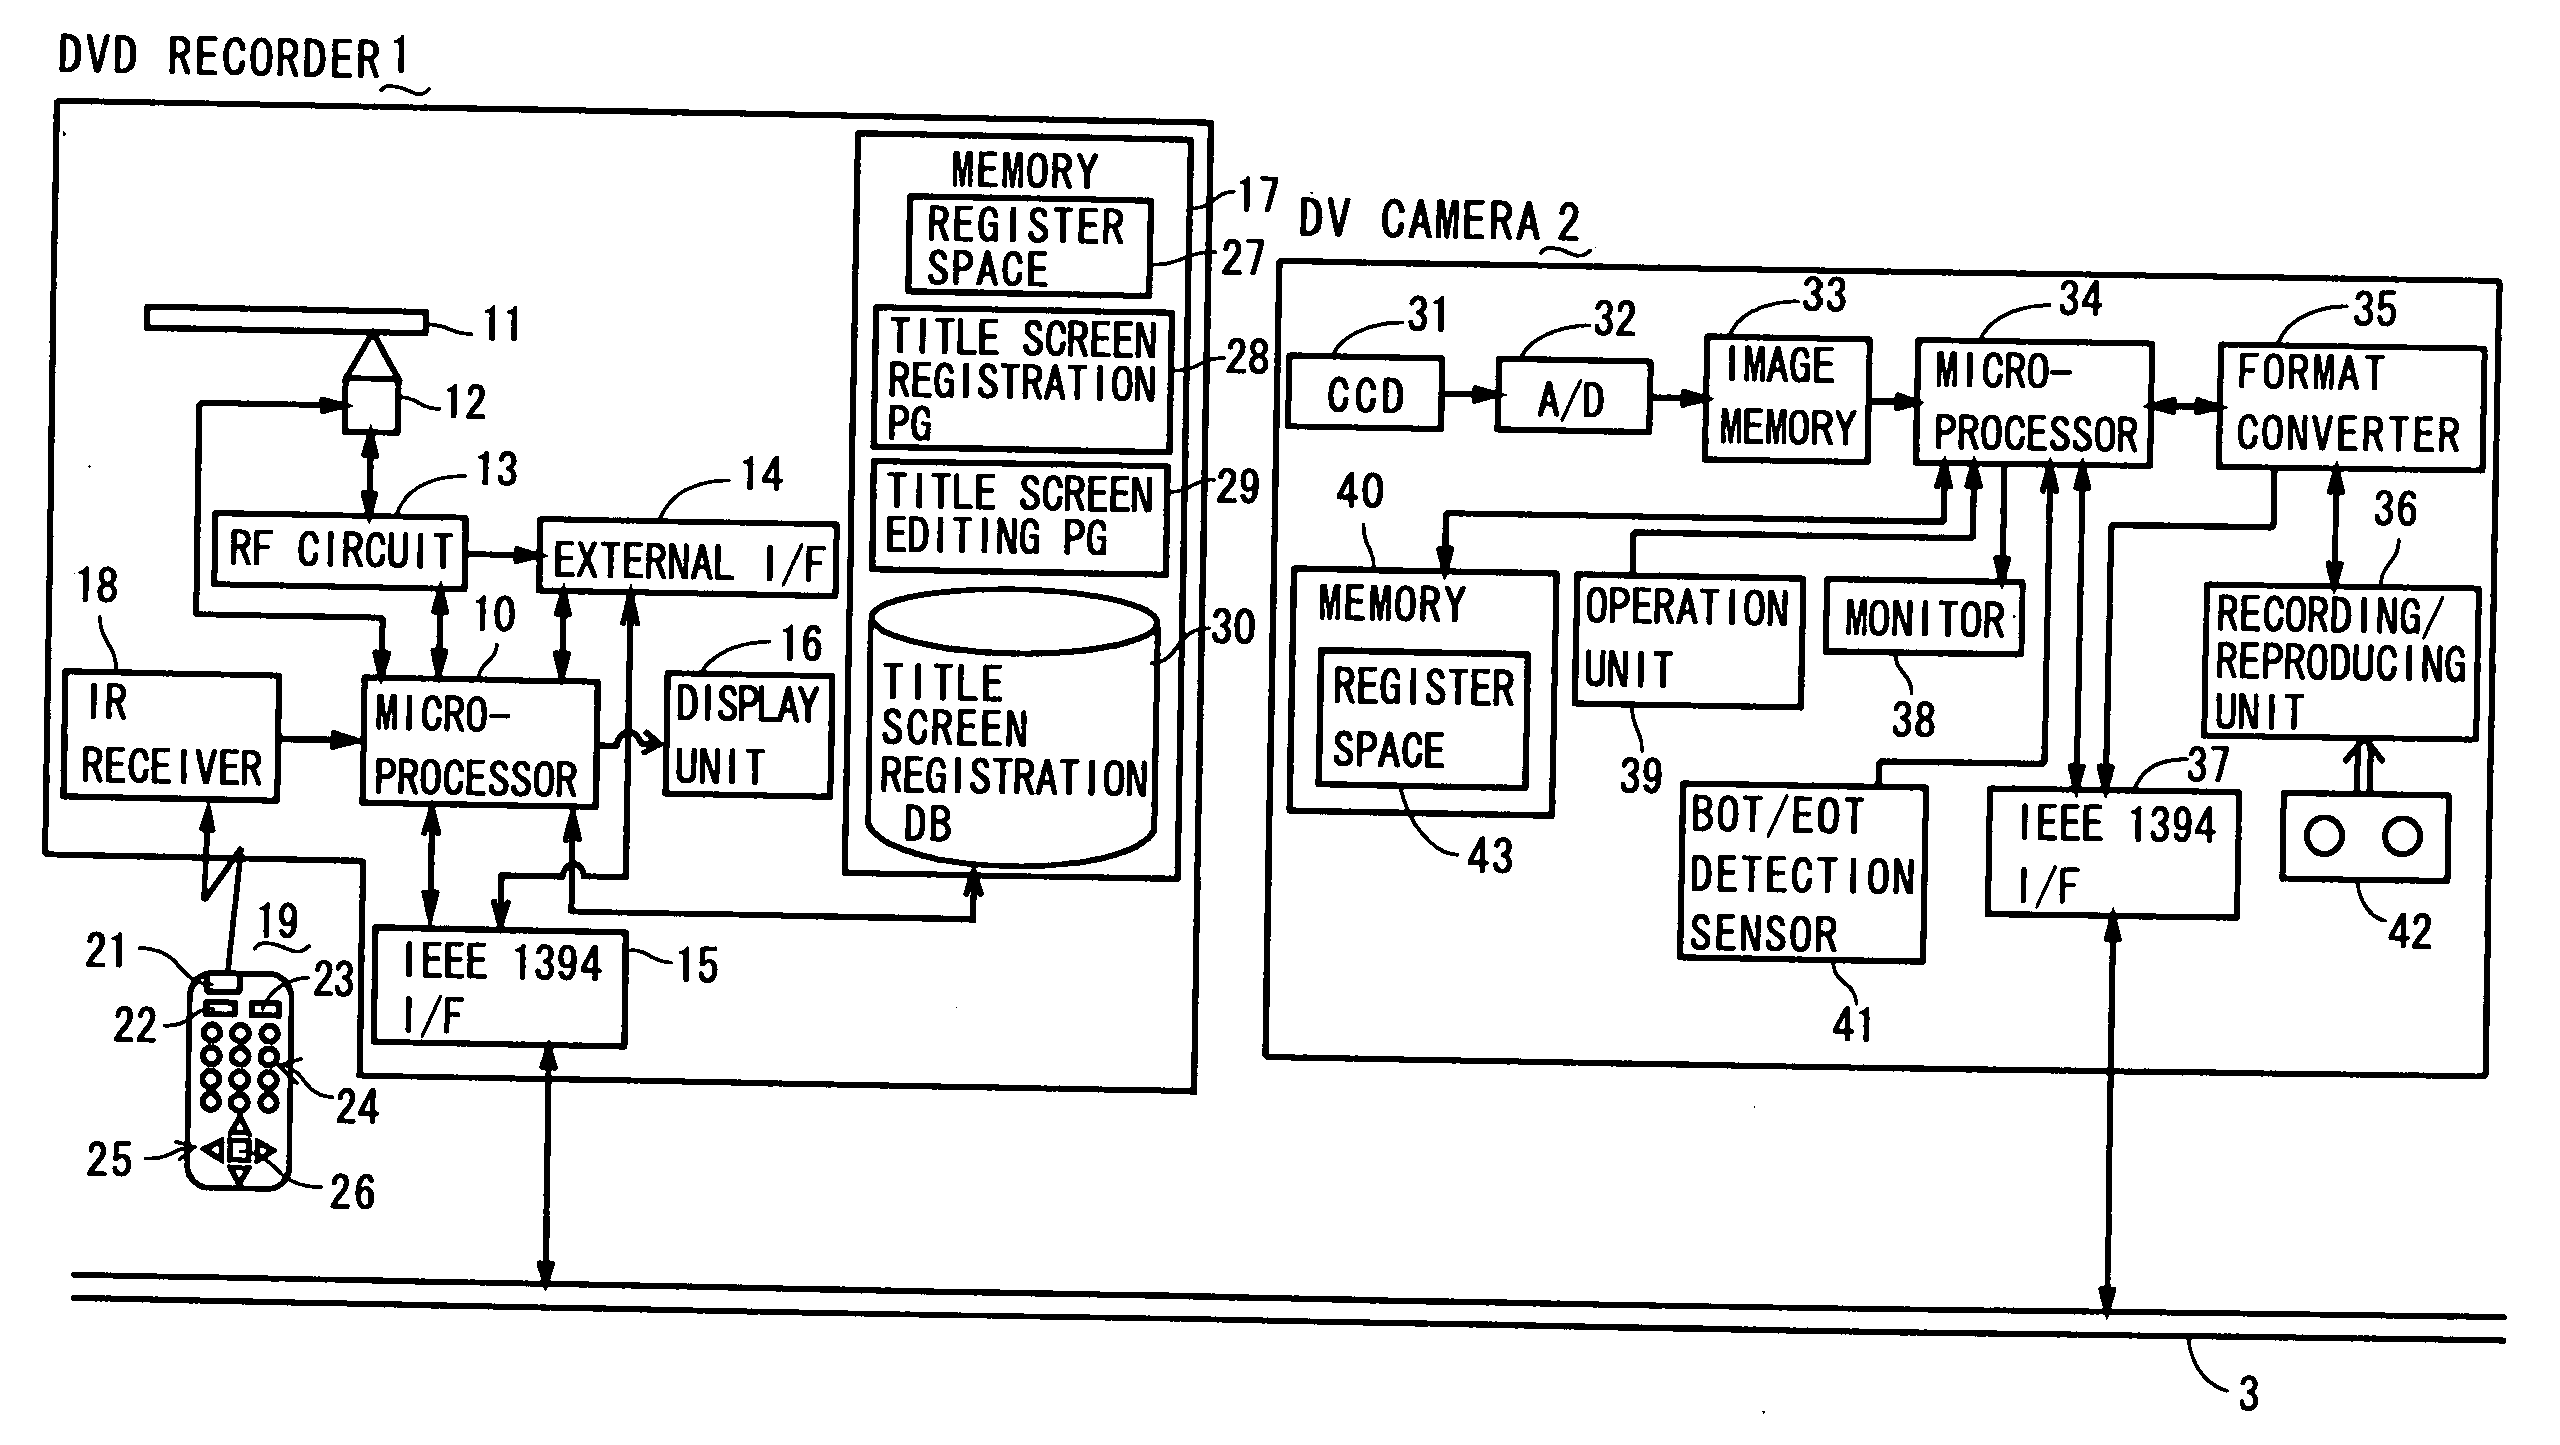 Digital video recording device to be connected to a digital video signal output device via an IEEE 1394 serial bus